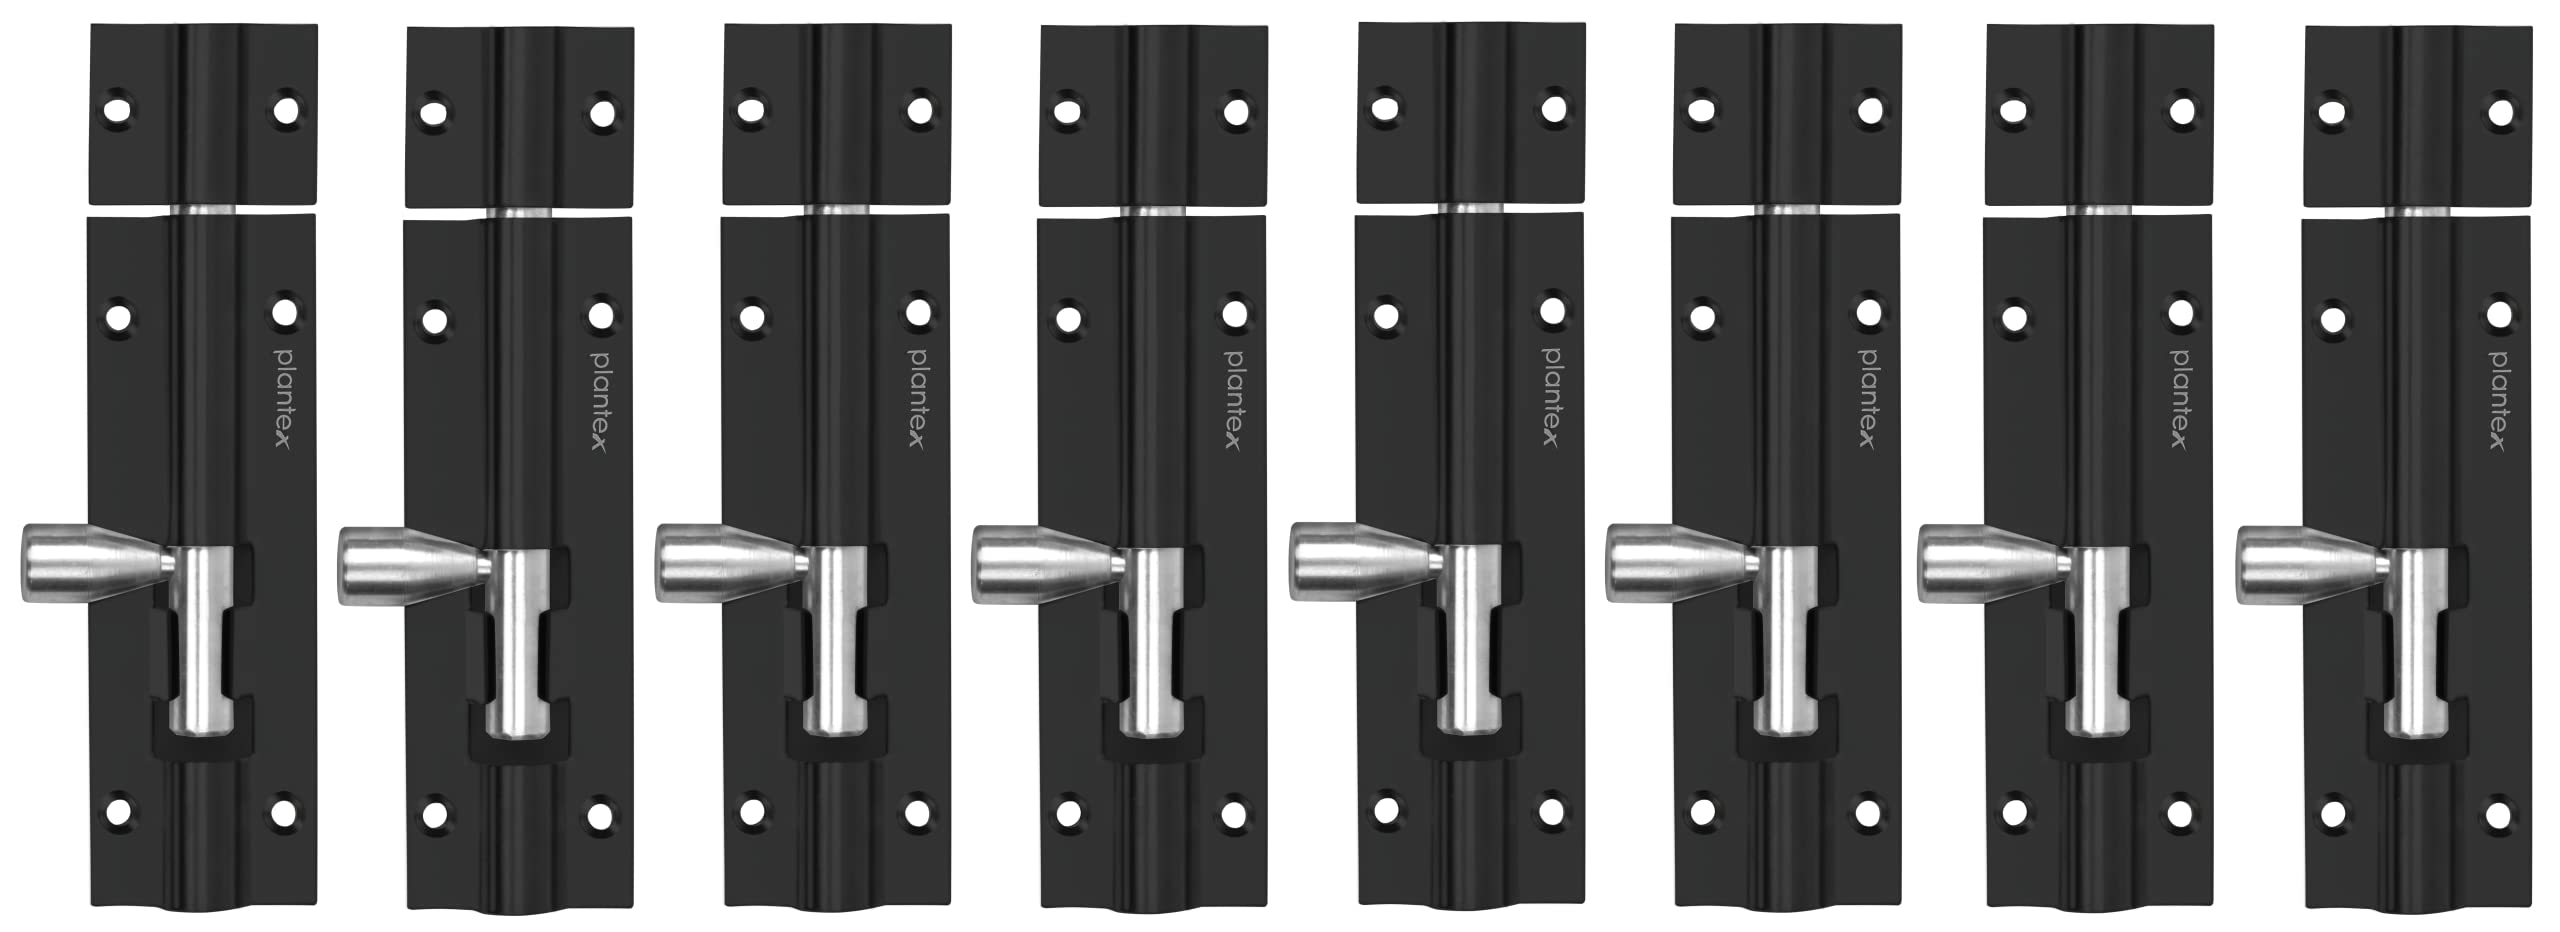 Plantex Multicolour Tower Bolt for Windows/Doors/Wardrobe - 4- inches (Pack of 8)